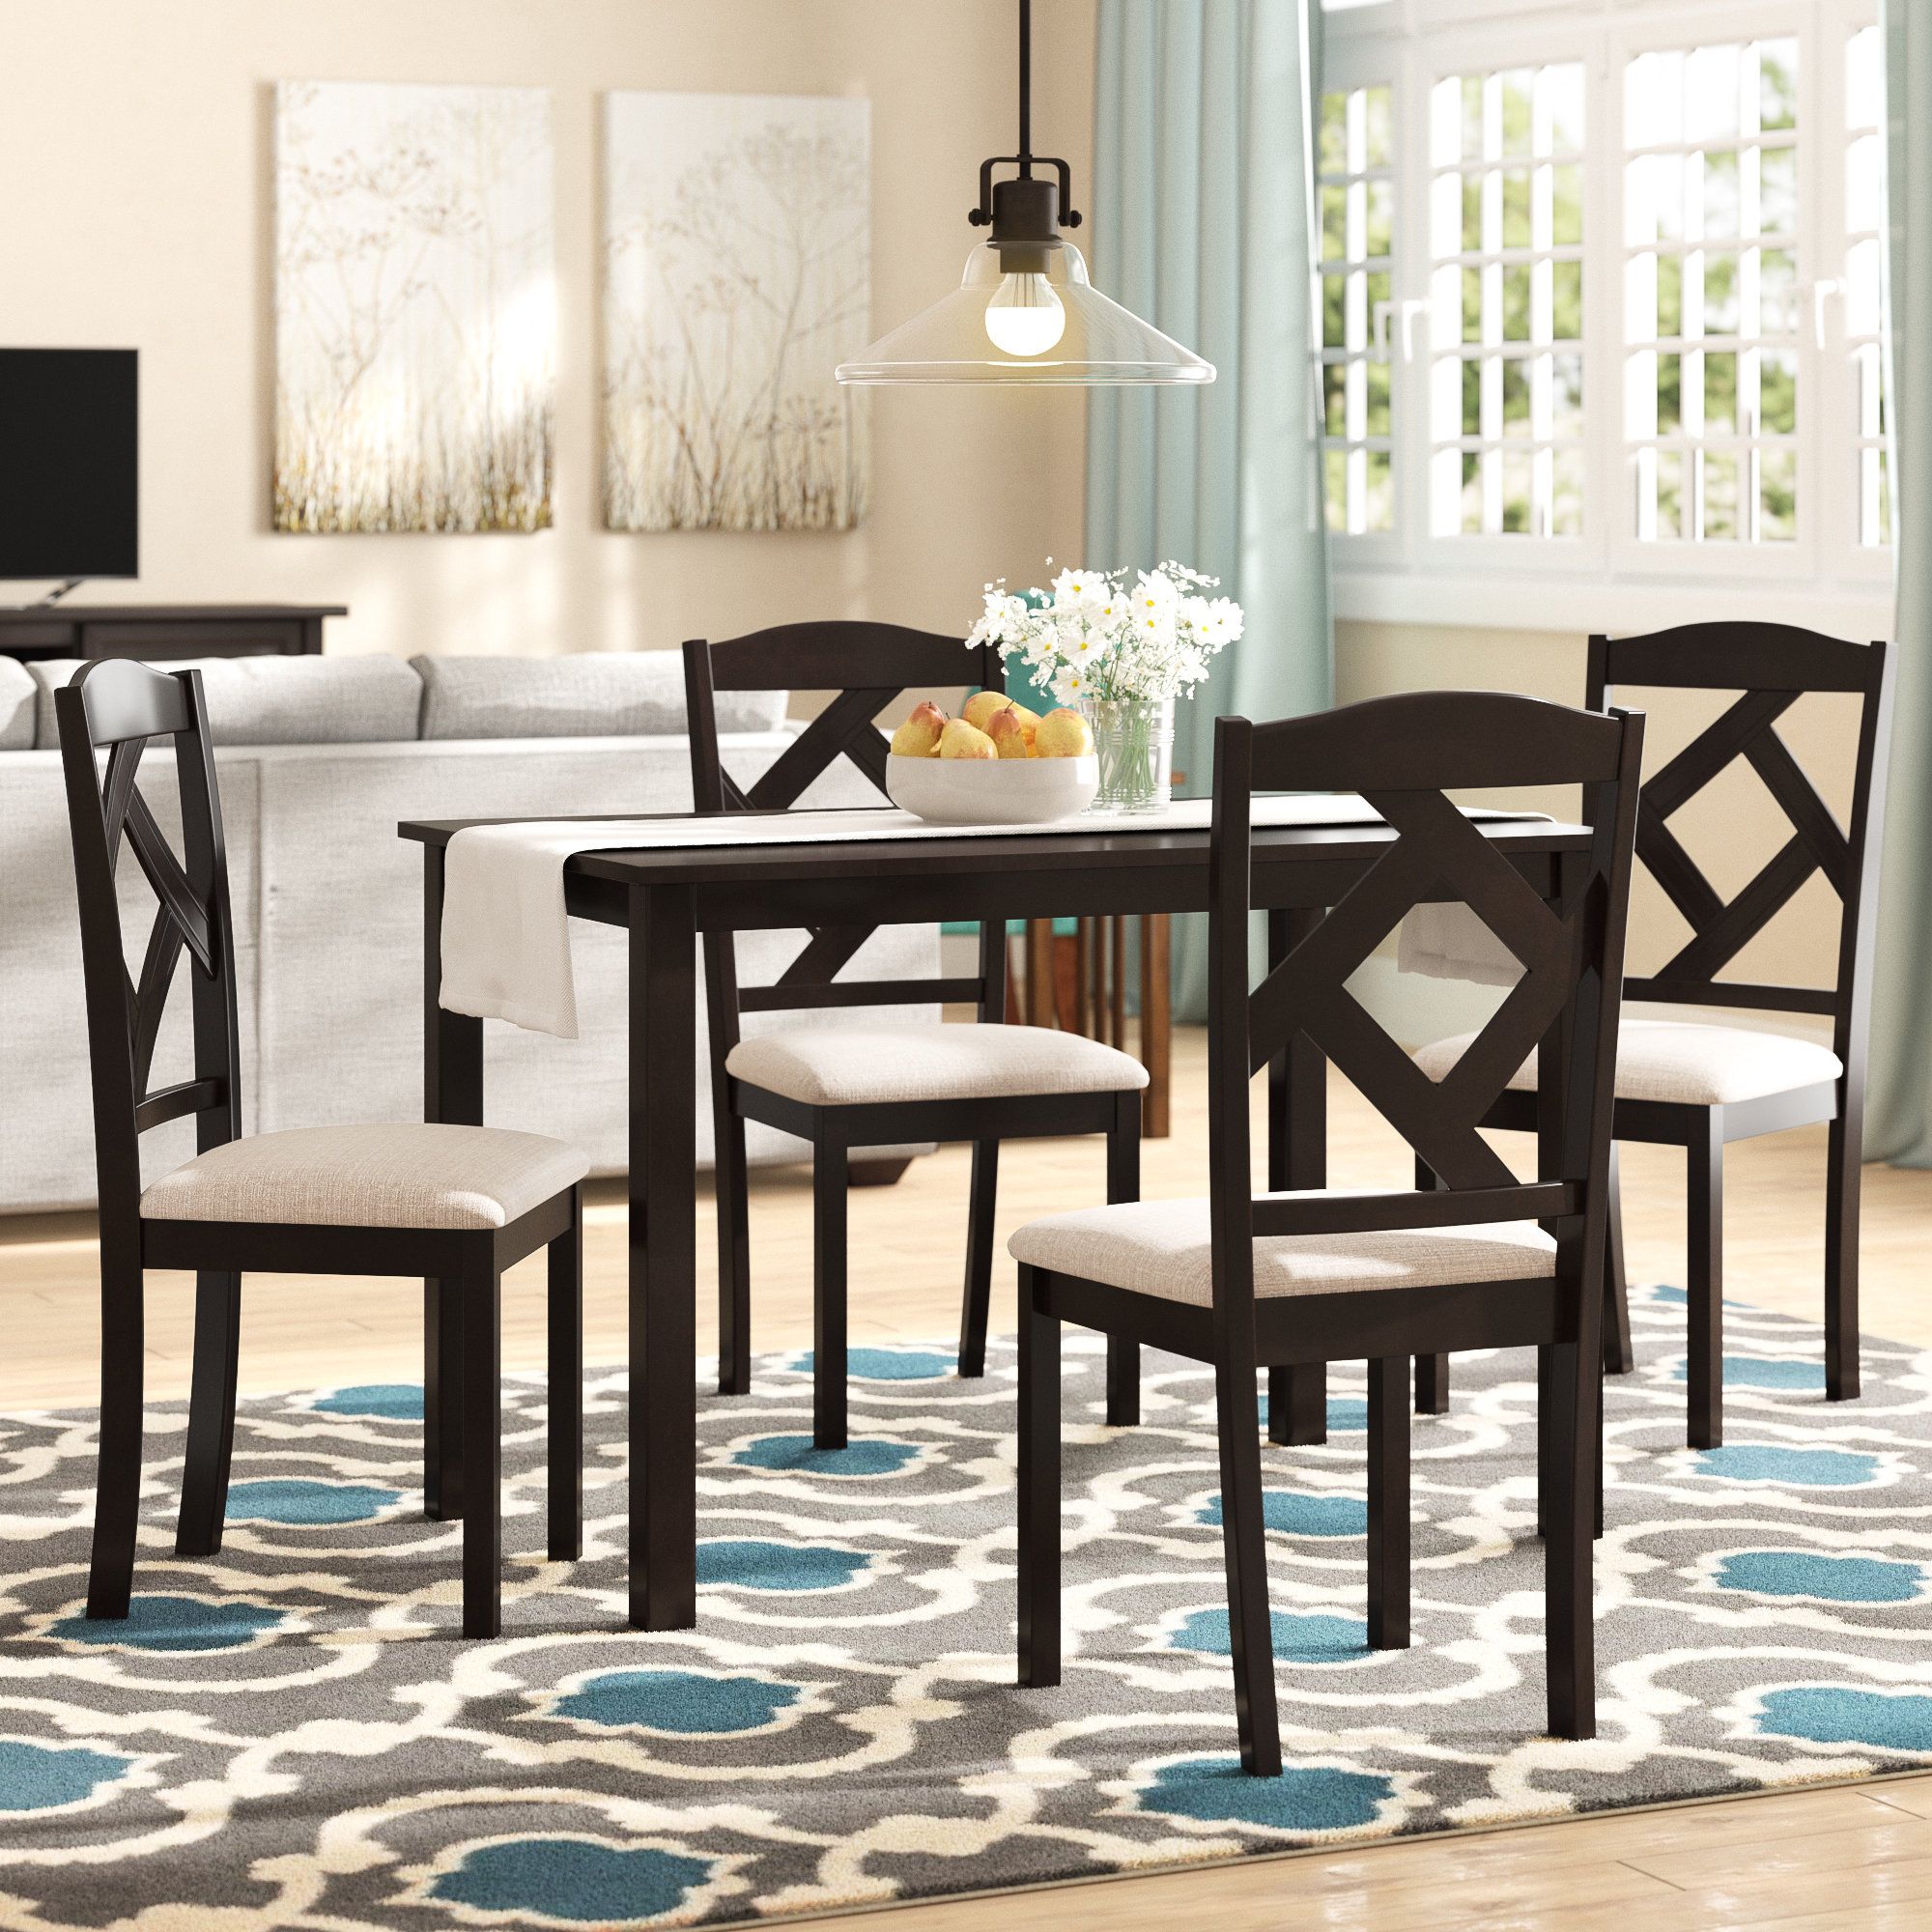 Goosman Modern And Contemporary 5 Piece Breakfast Nook Dining Set In Popular 5 Piece Breakfast Nook Dining Sets (View 1 of 20)